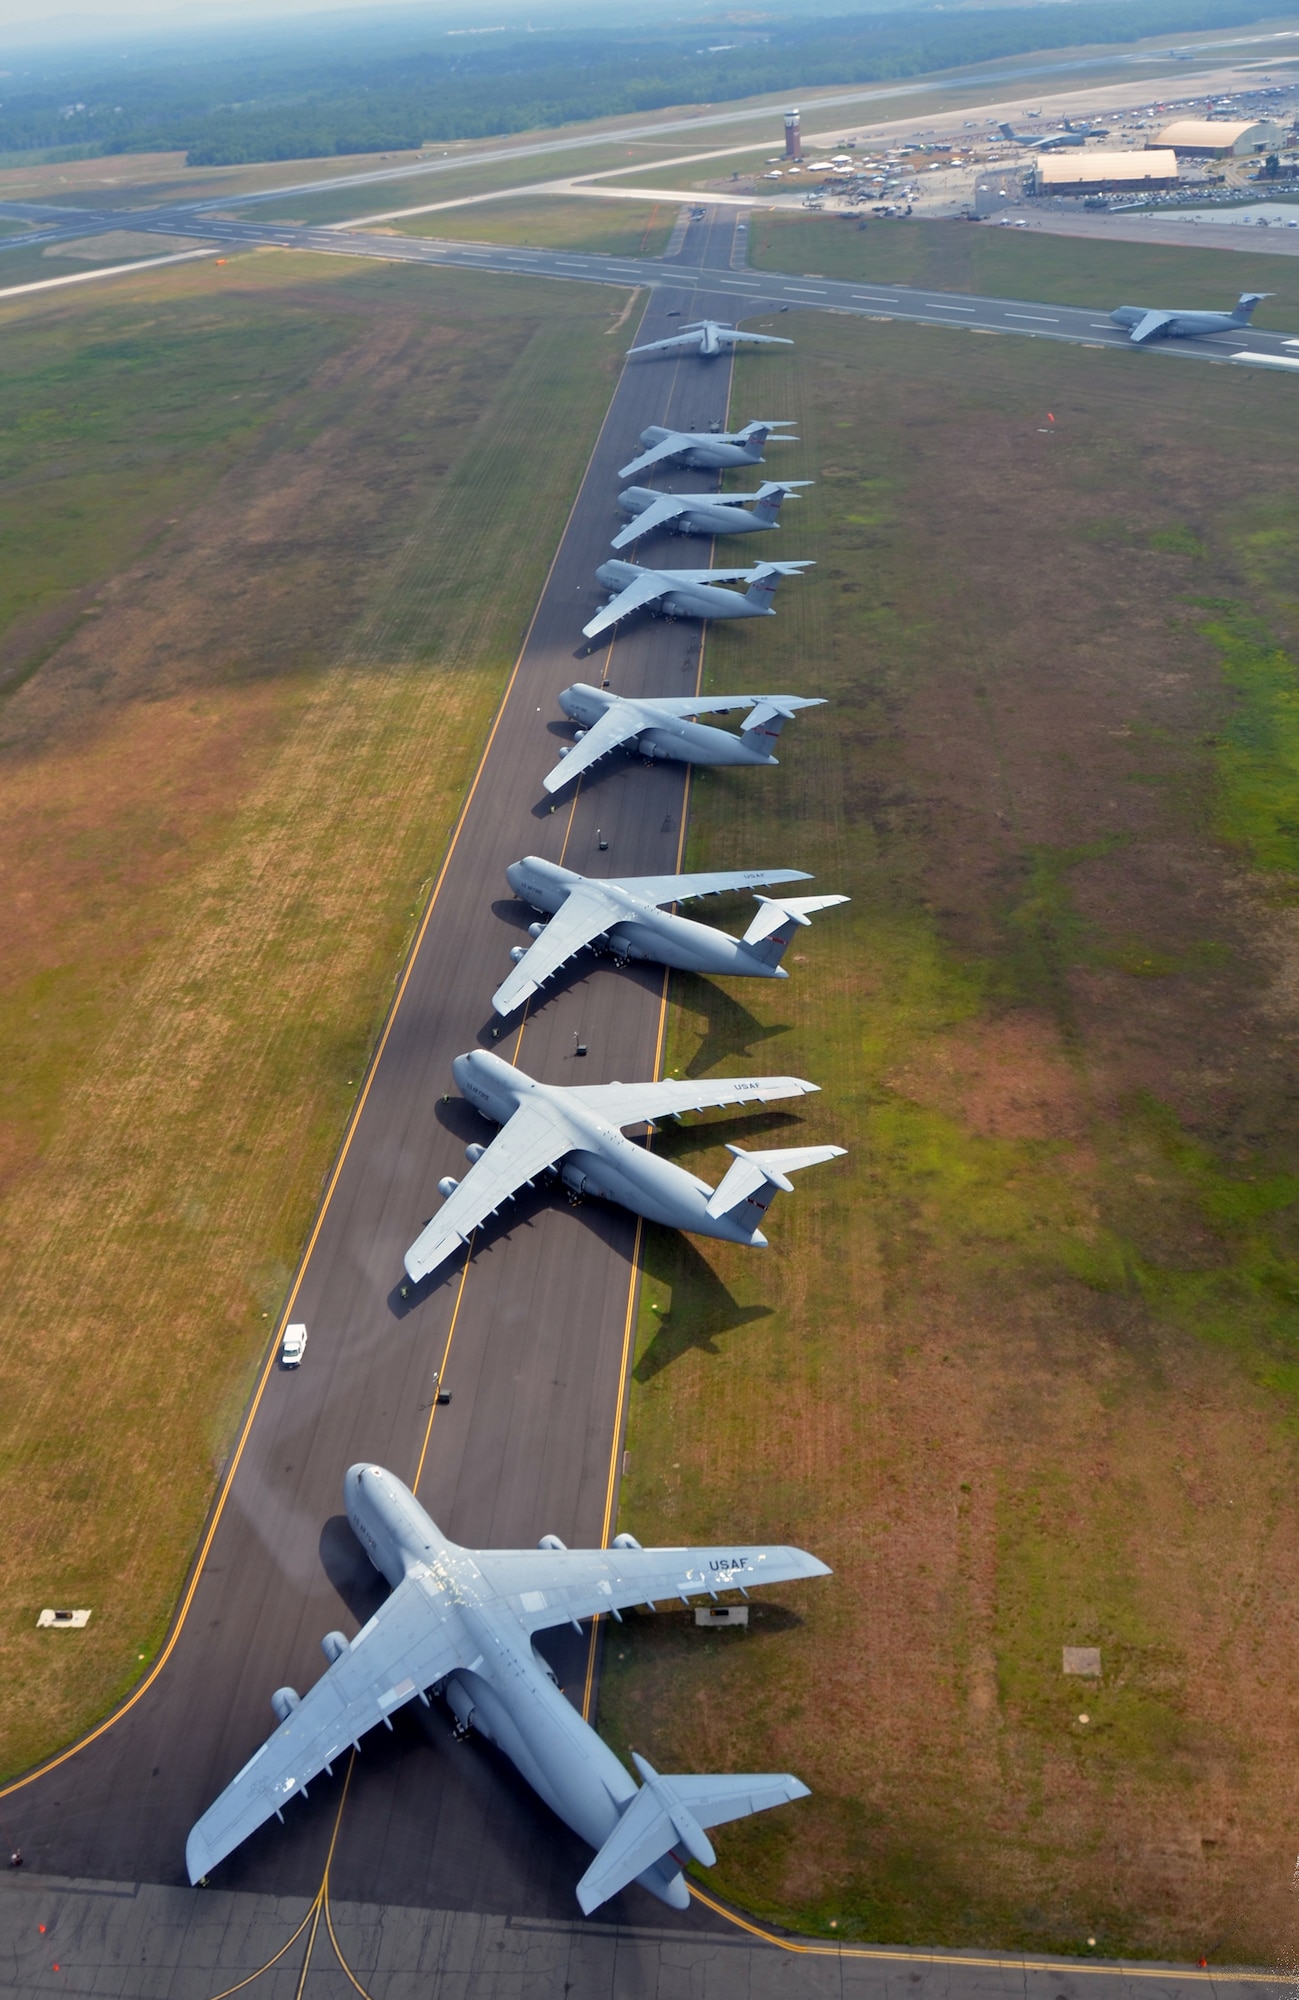 The Galaxies aligned on a Westover runway, to make room for Air Show aircraft this past August. The 2012 Great New England Air Show was the largest Westover has had since 1974, boasting more than 60 aircraft. (U.S. Air Force photo by SrA. Kelly Galloway)